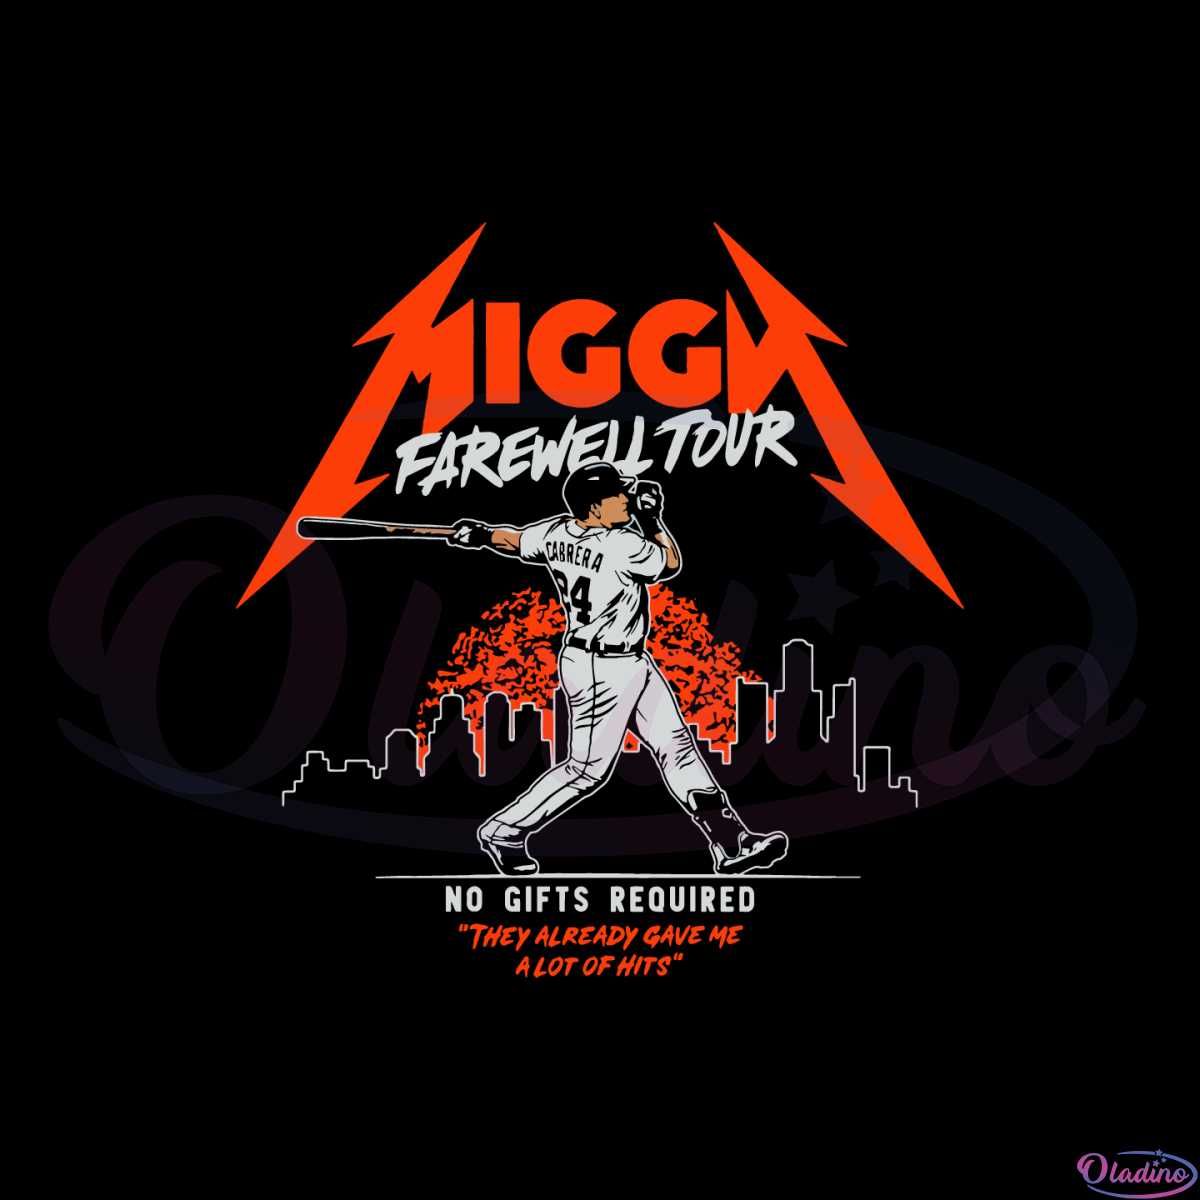 miguel-cabrera-miggy-farewell-tour-svg-cutting-files